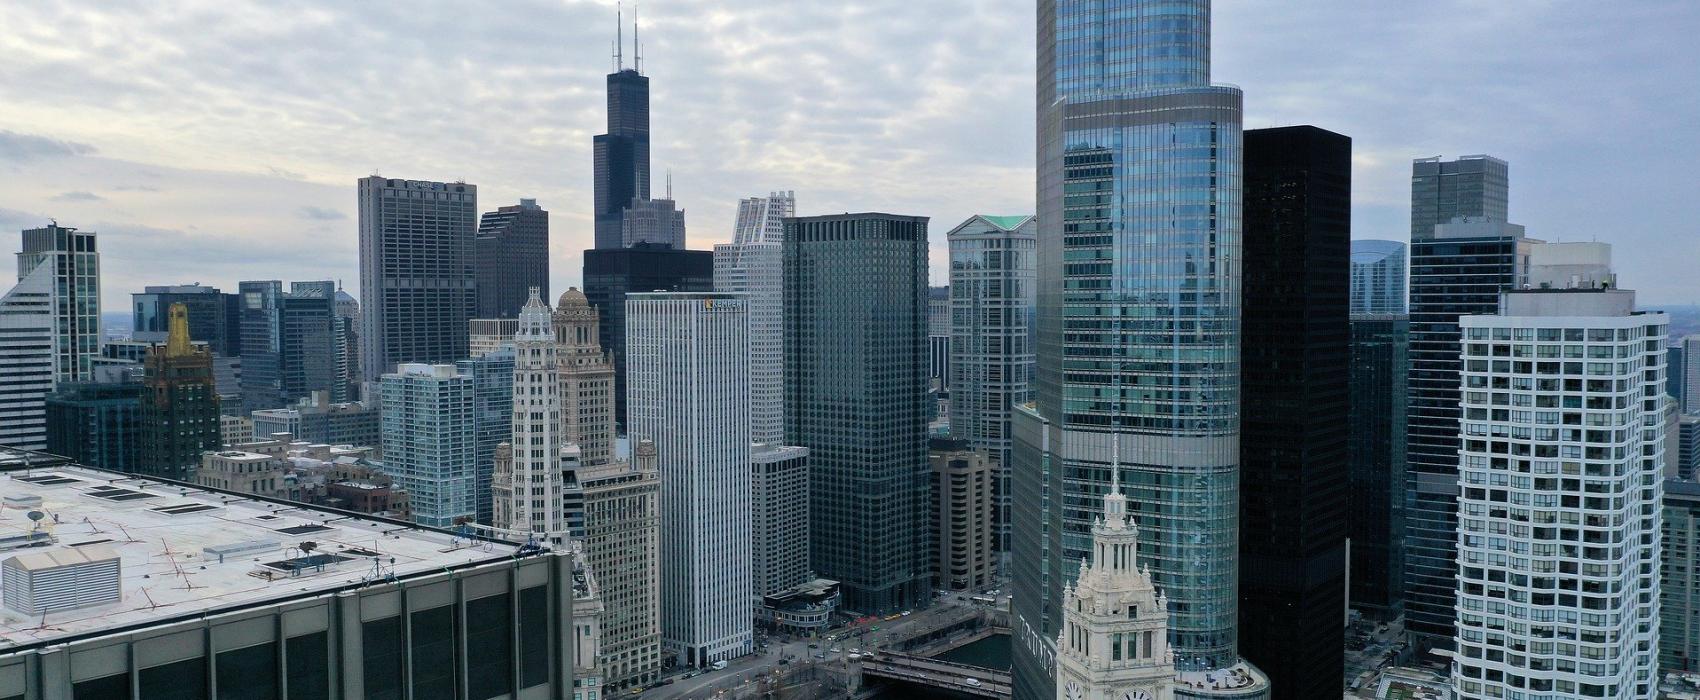 image of chicago river and buildings around